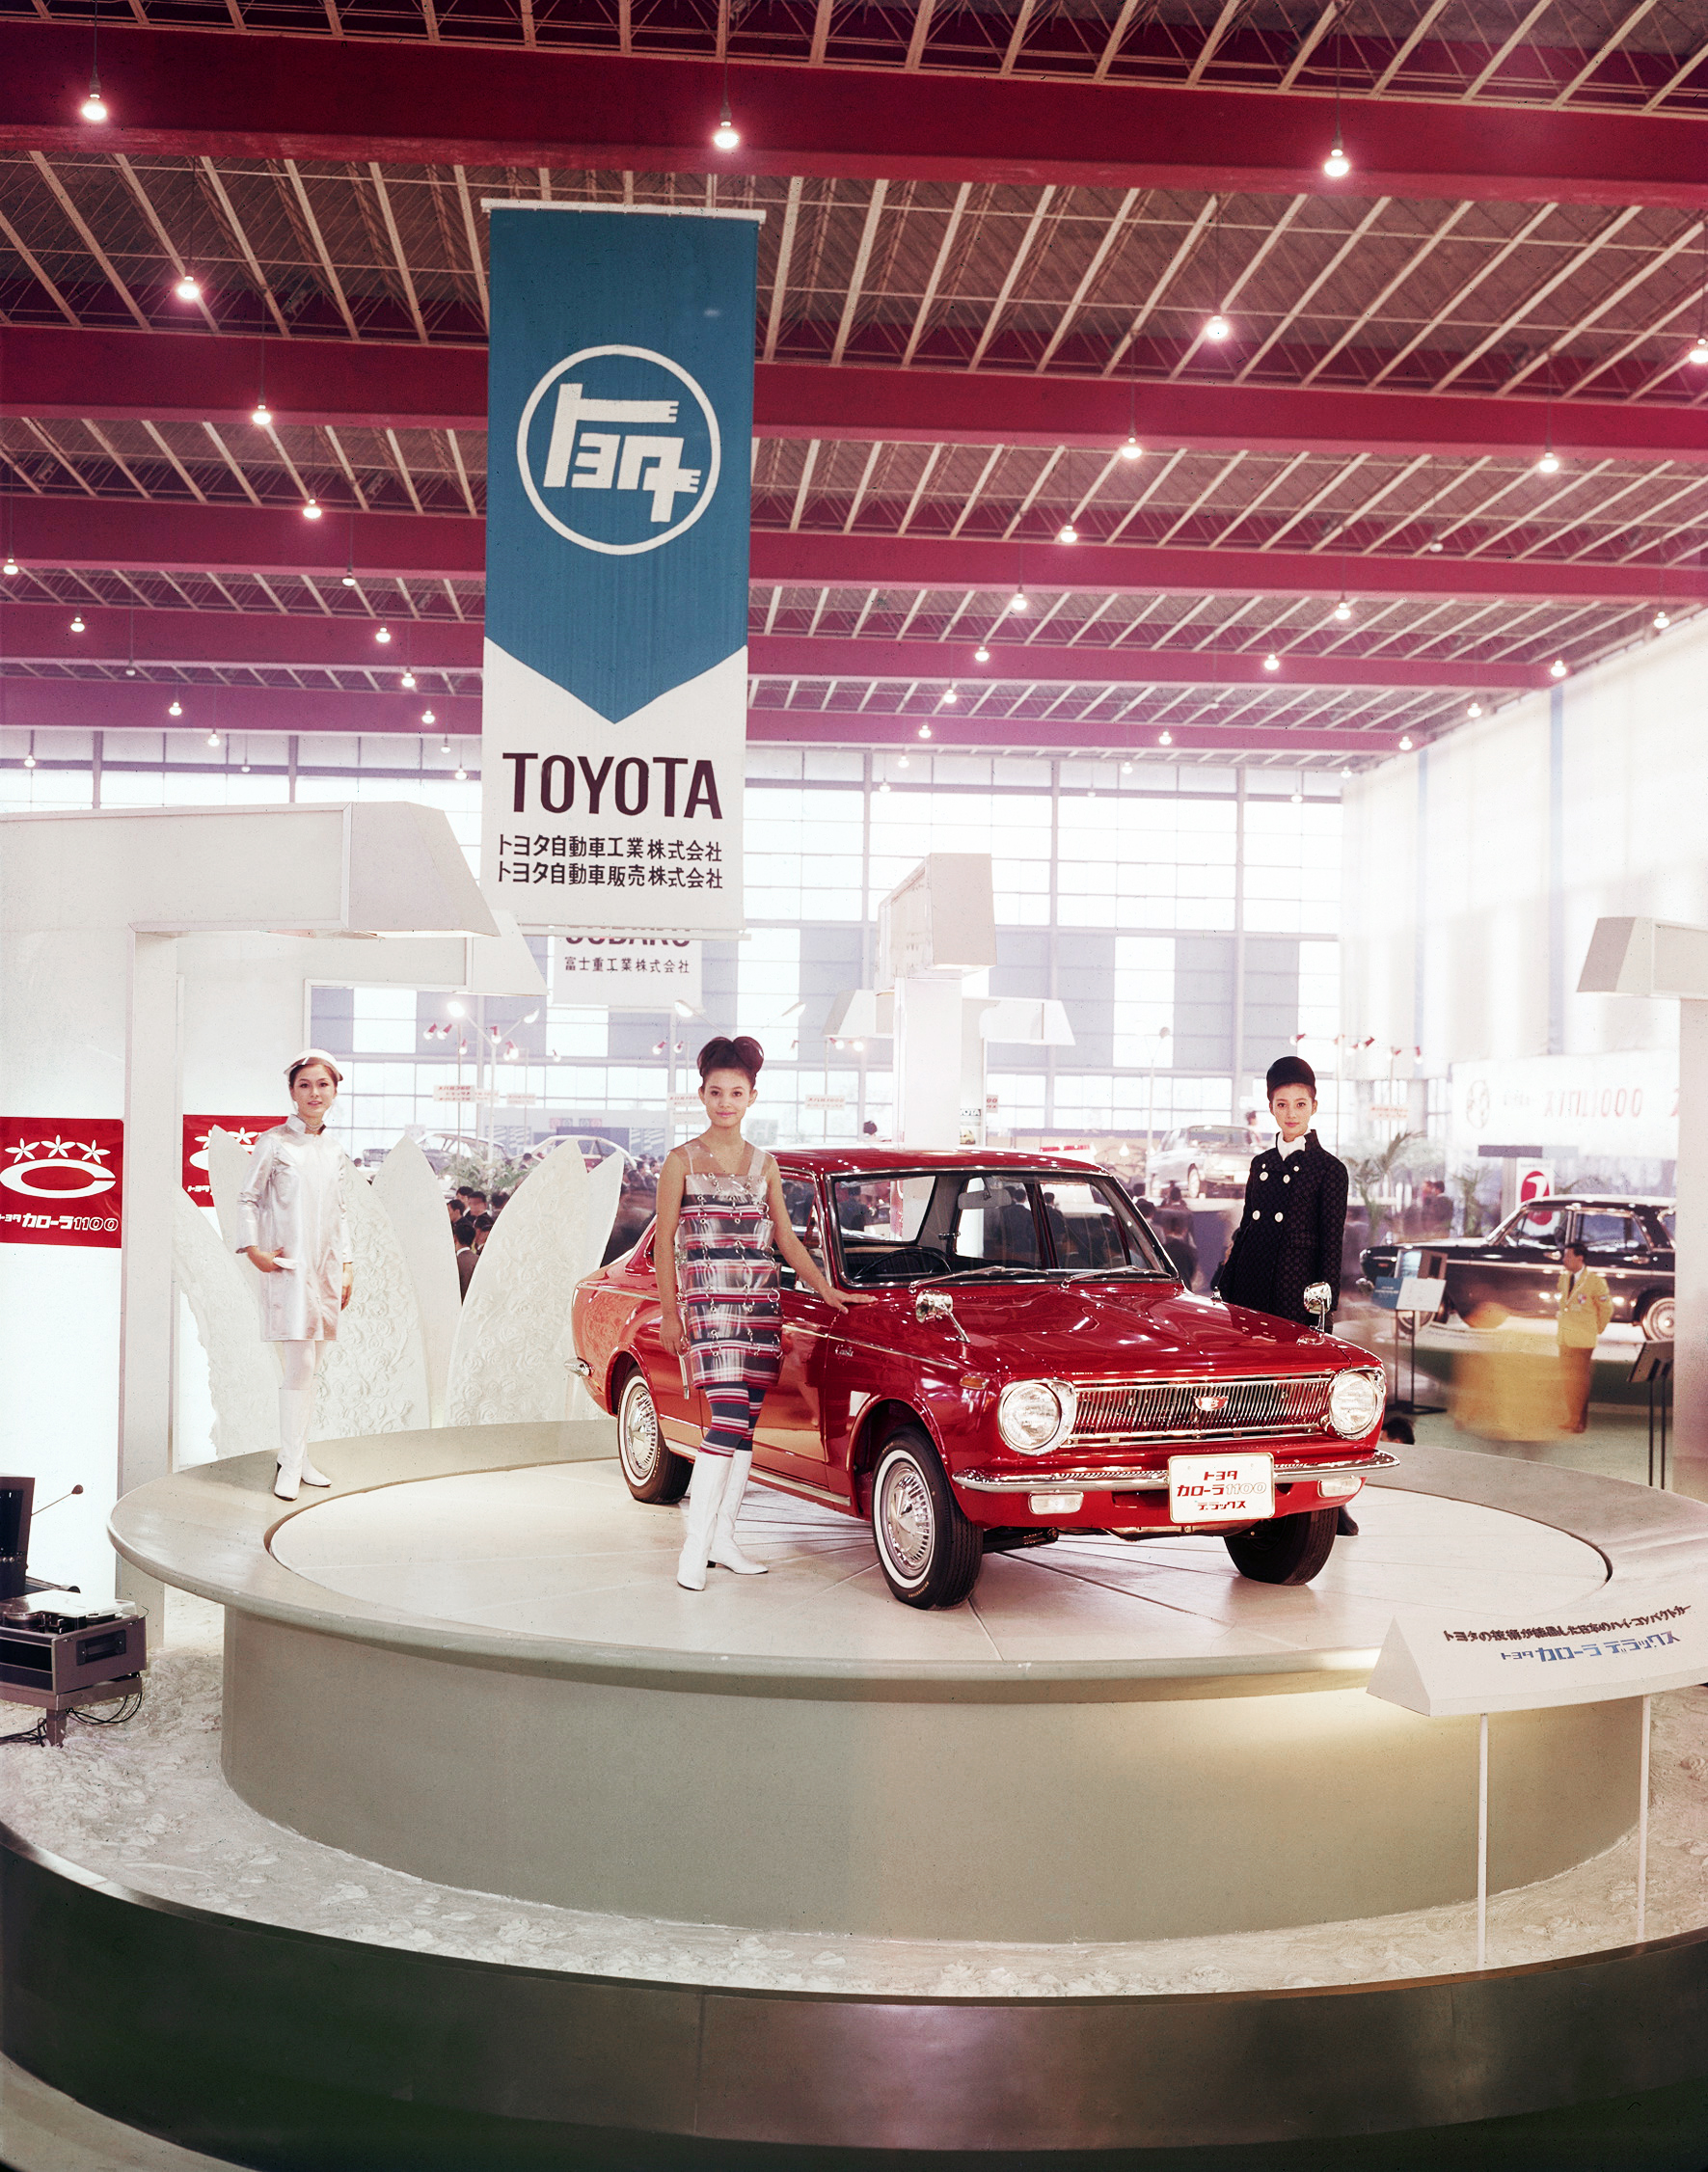 The debut of the first generation Corolla at the 13rd Tokyo Motor Show on October 1966